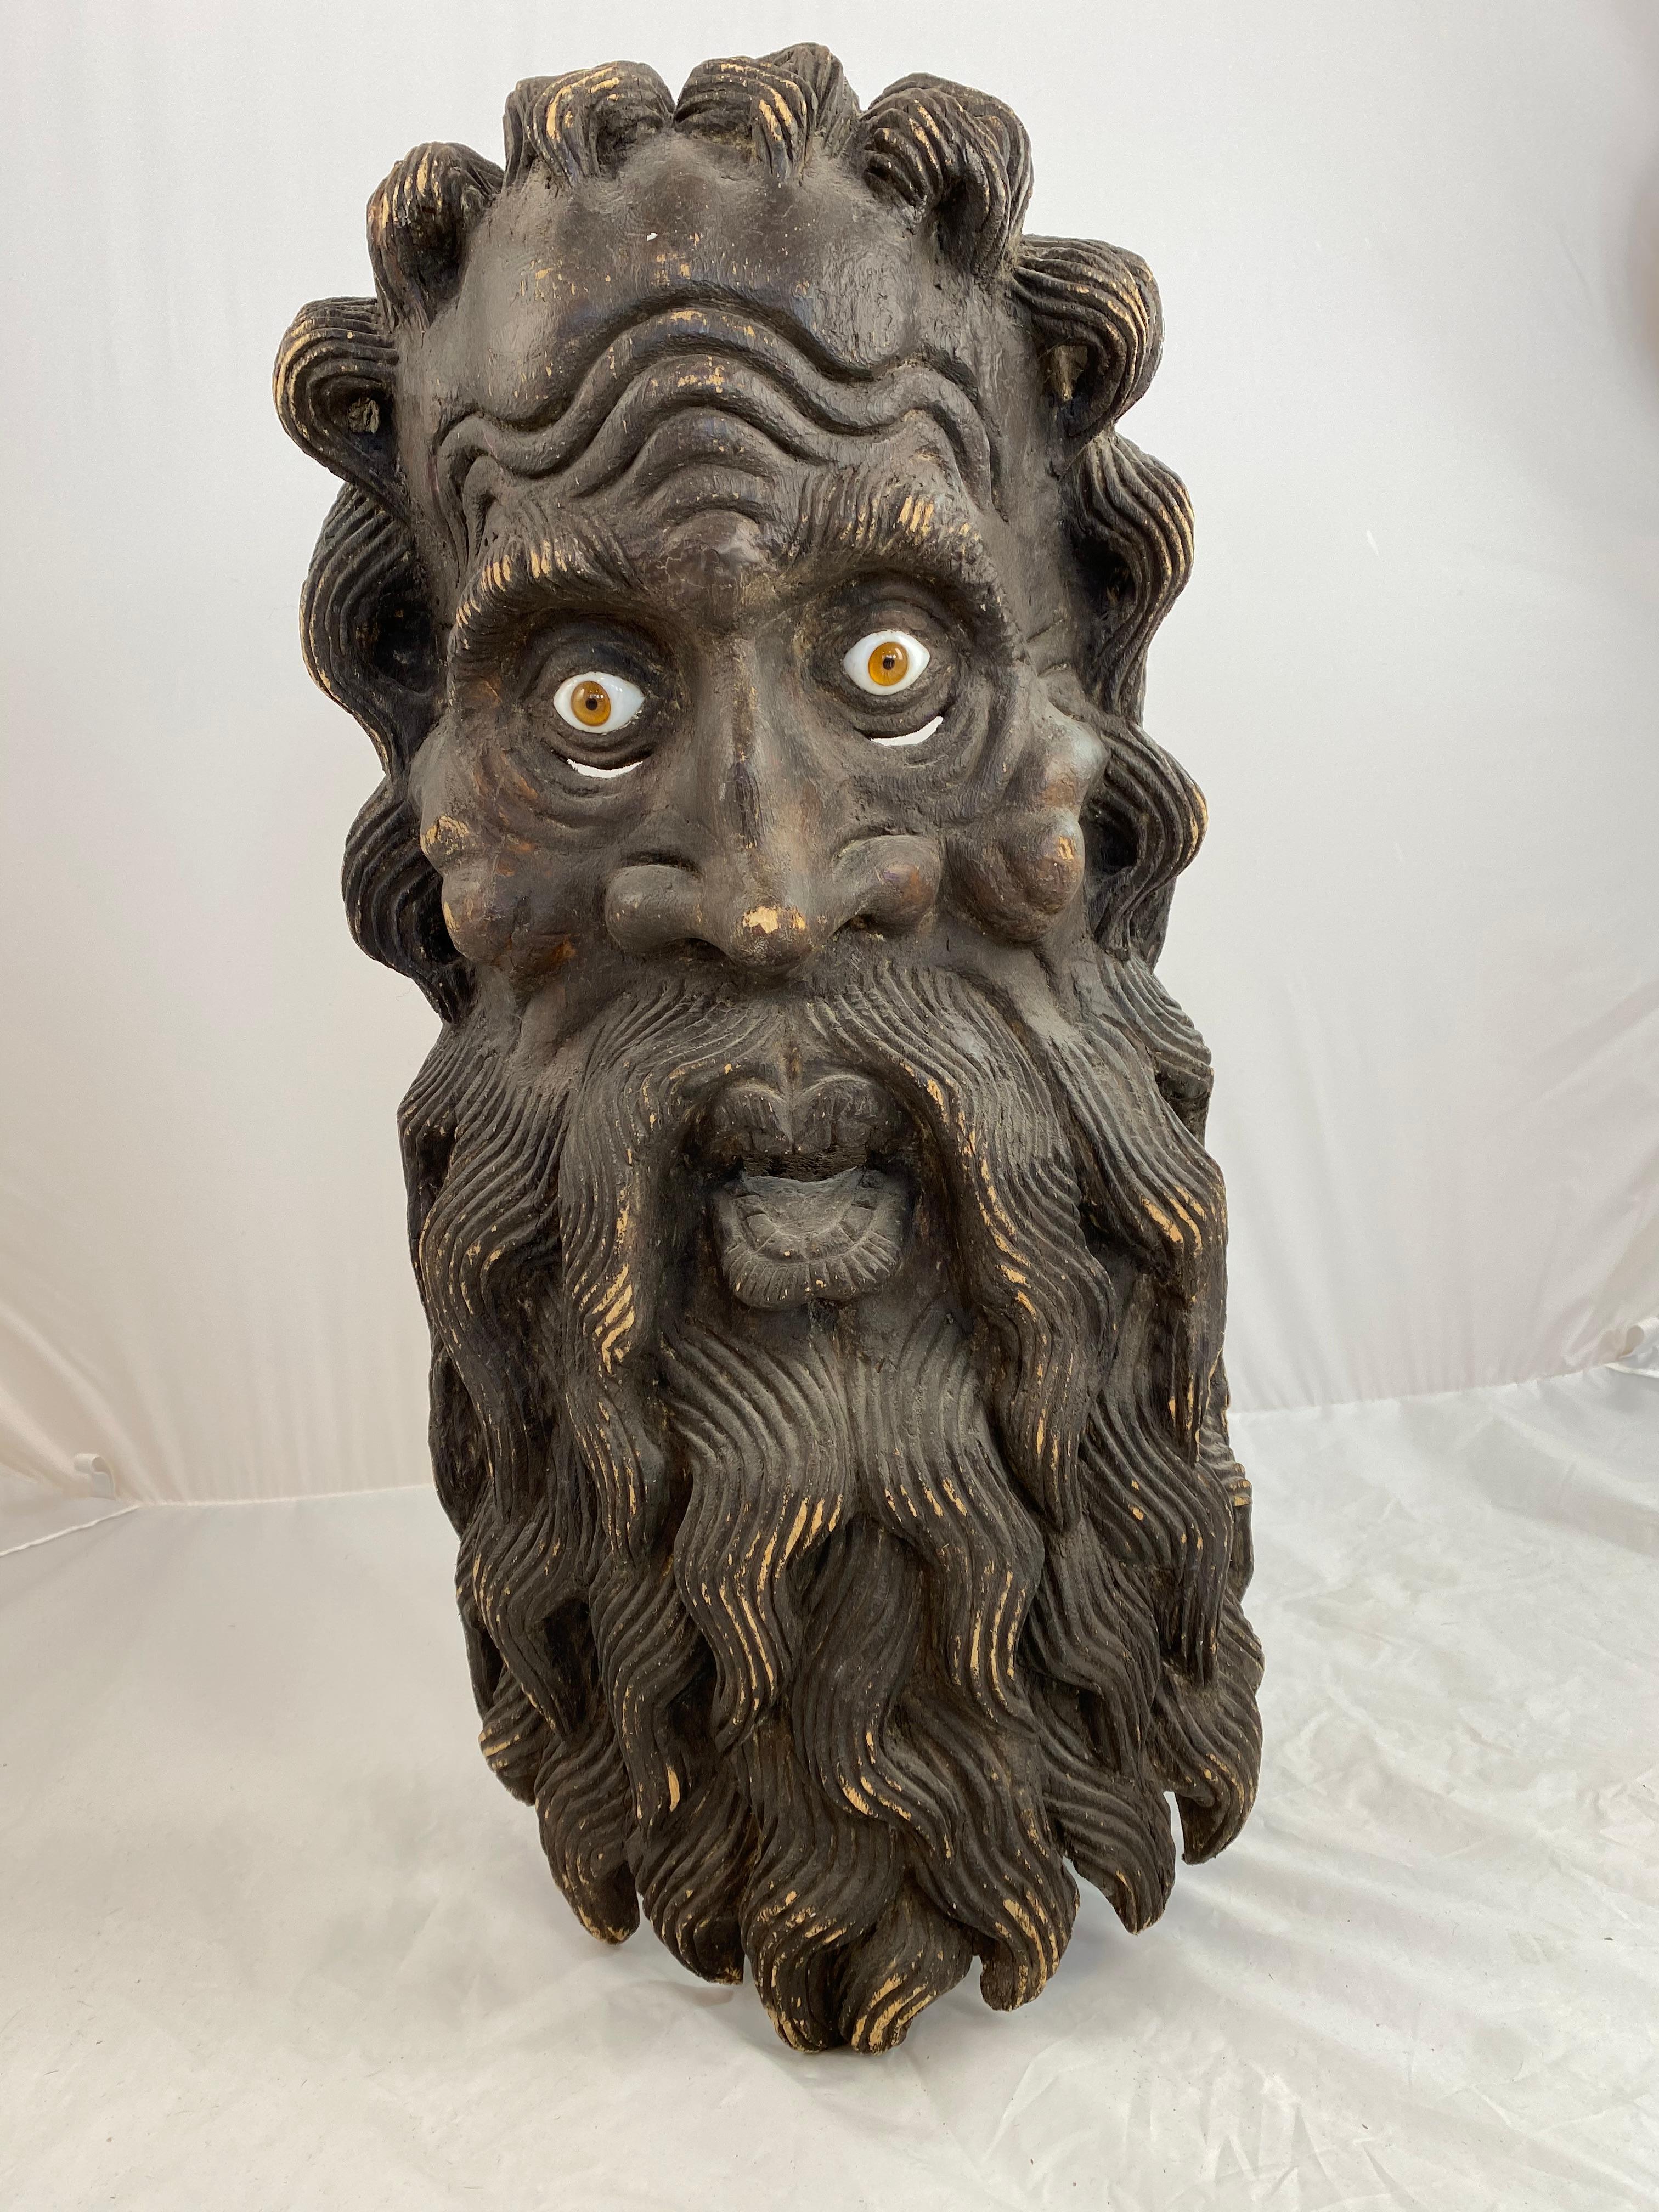 A large and interesting 19th c theatrical wooden mask. Sculptured of wood with great skill and inlayed with glass eyes. He looks somewhat crazy but with a great sense of humour.